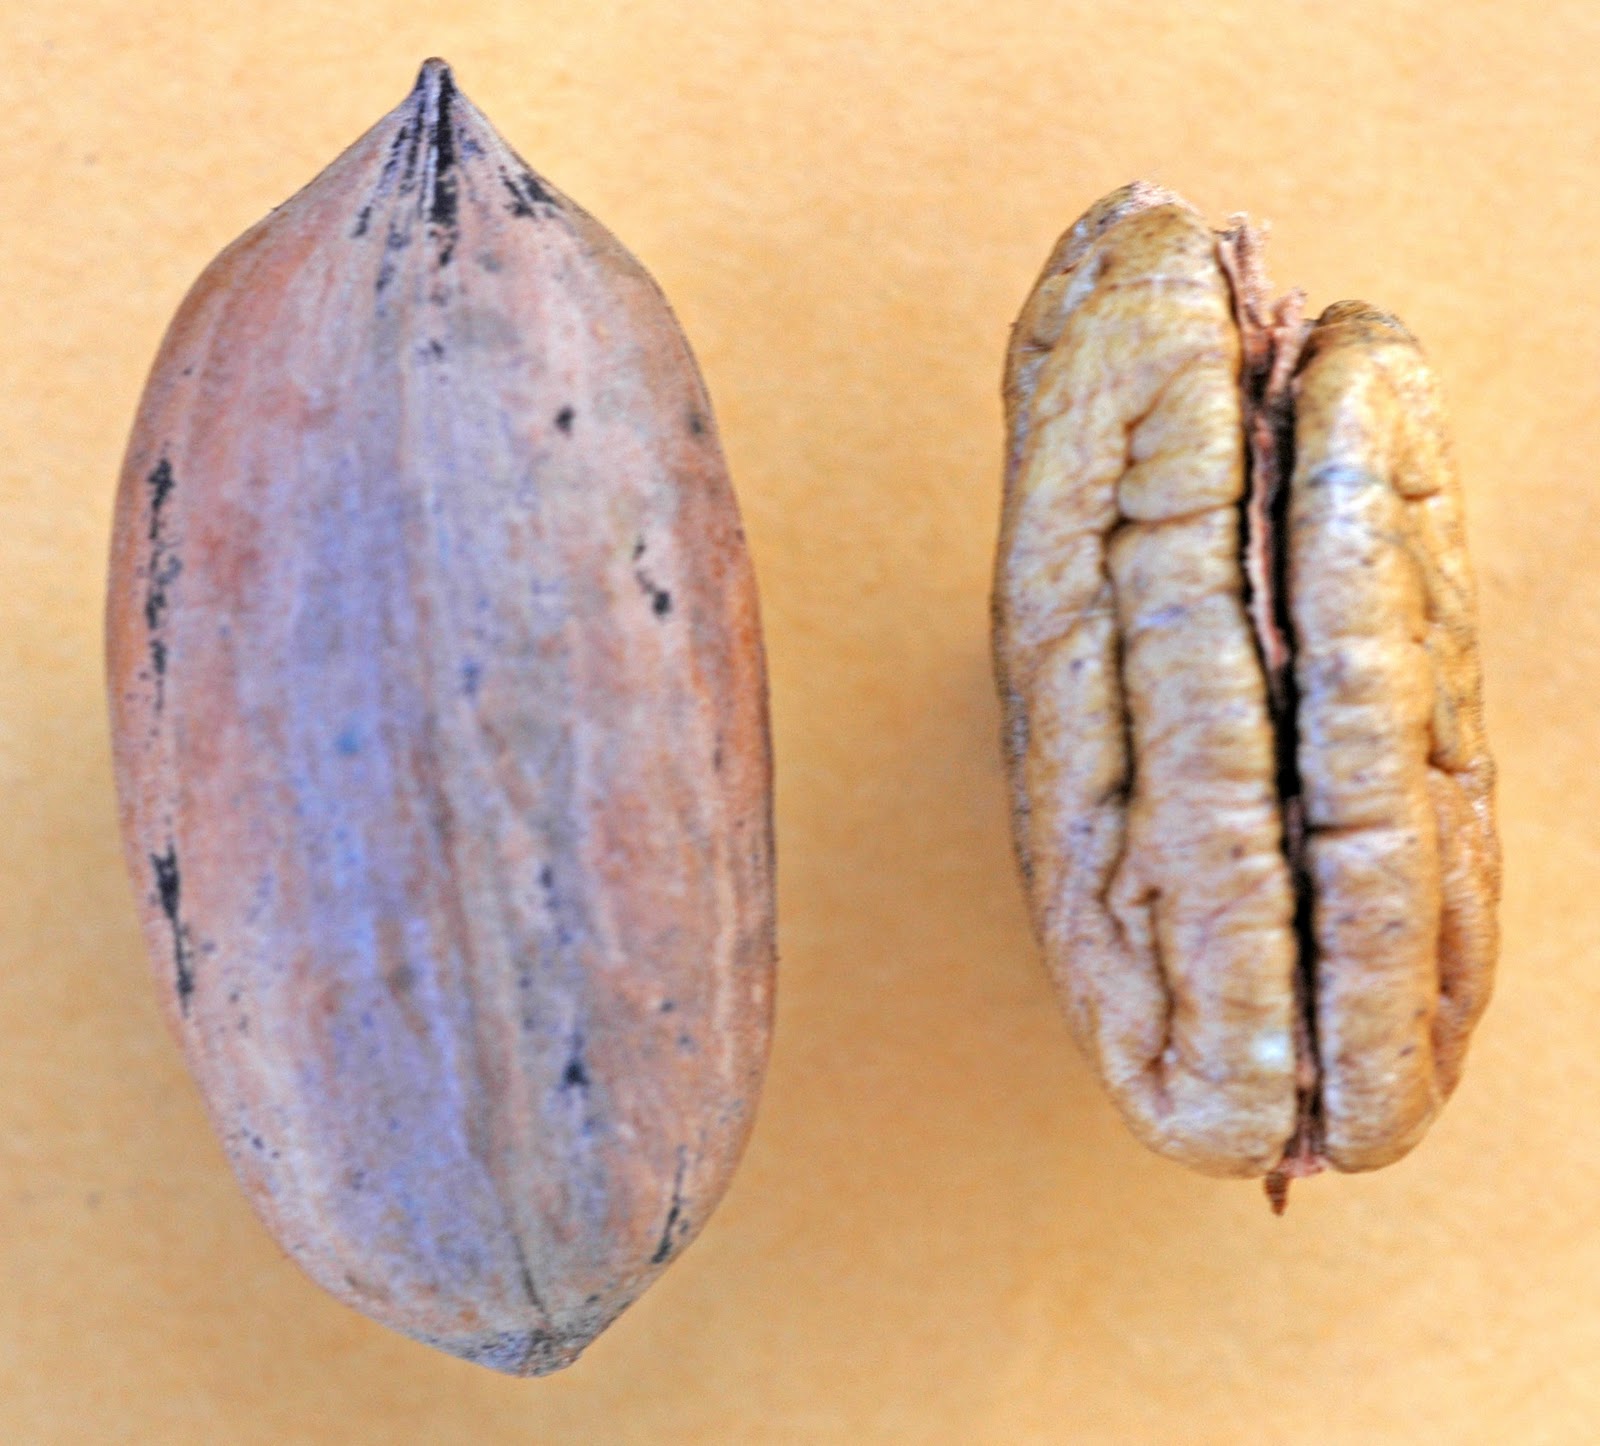 Pecan seeds grafted variety or native Organic cold hardy nut tree long lived 5